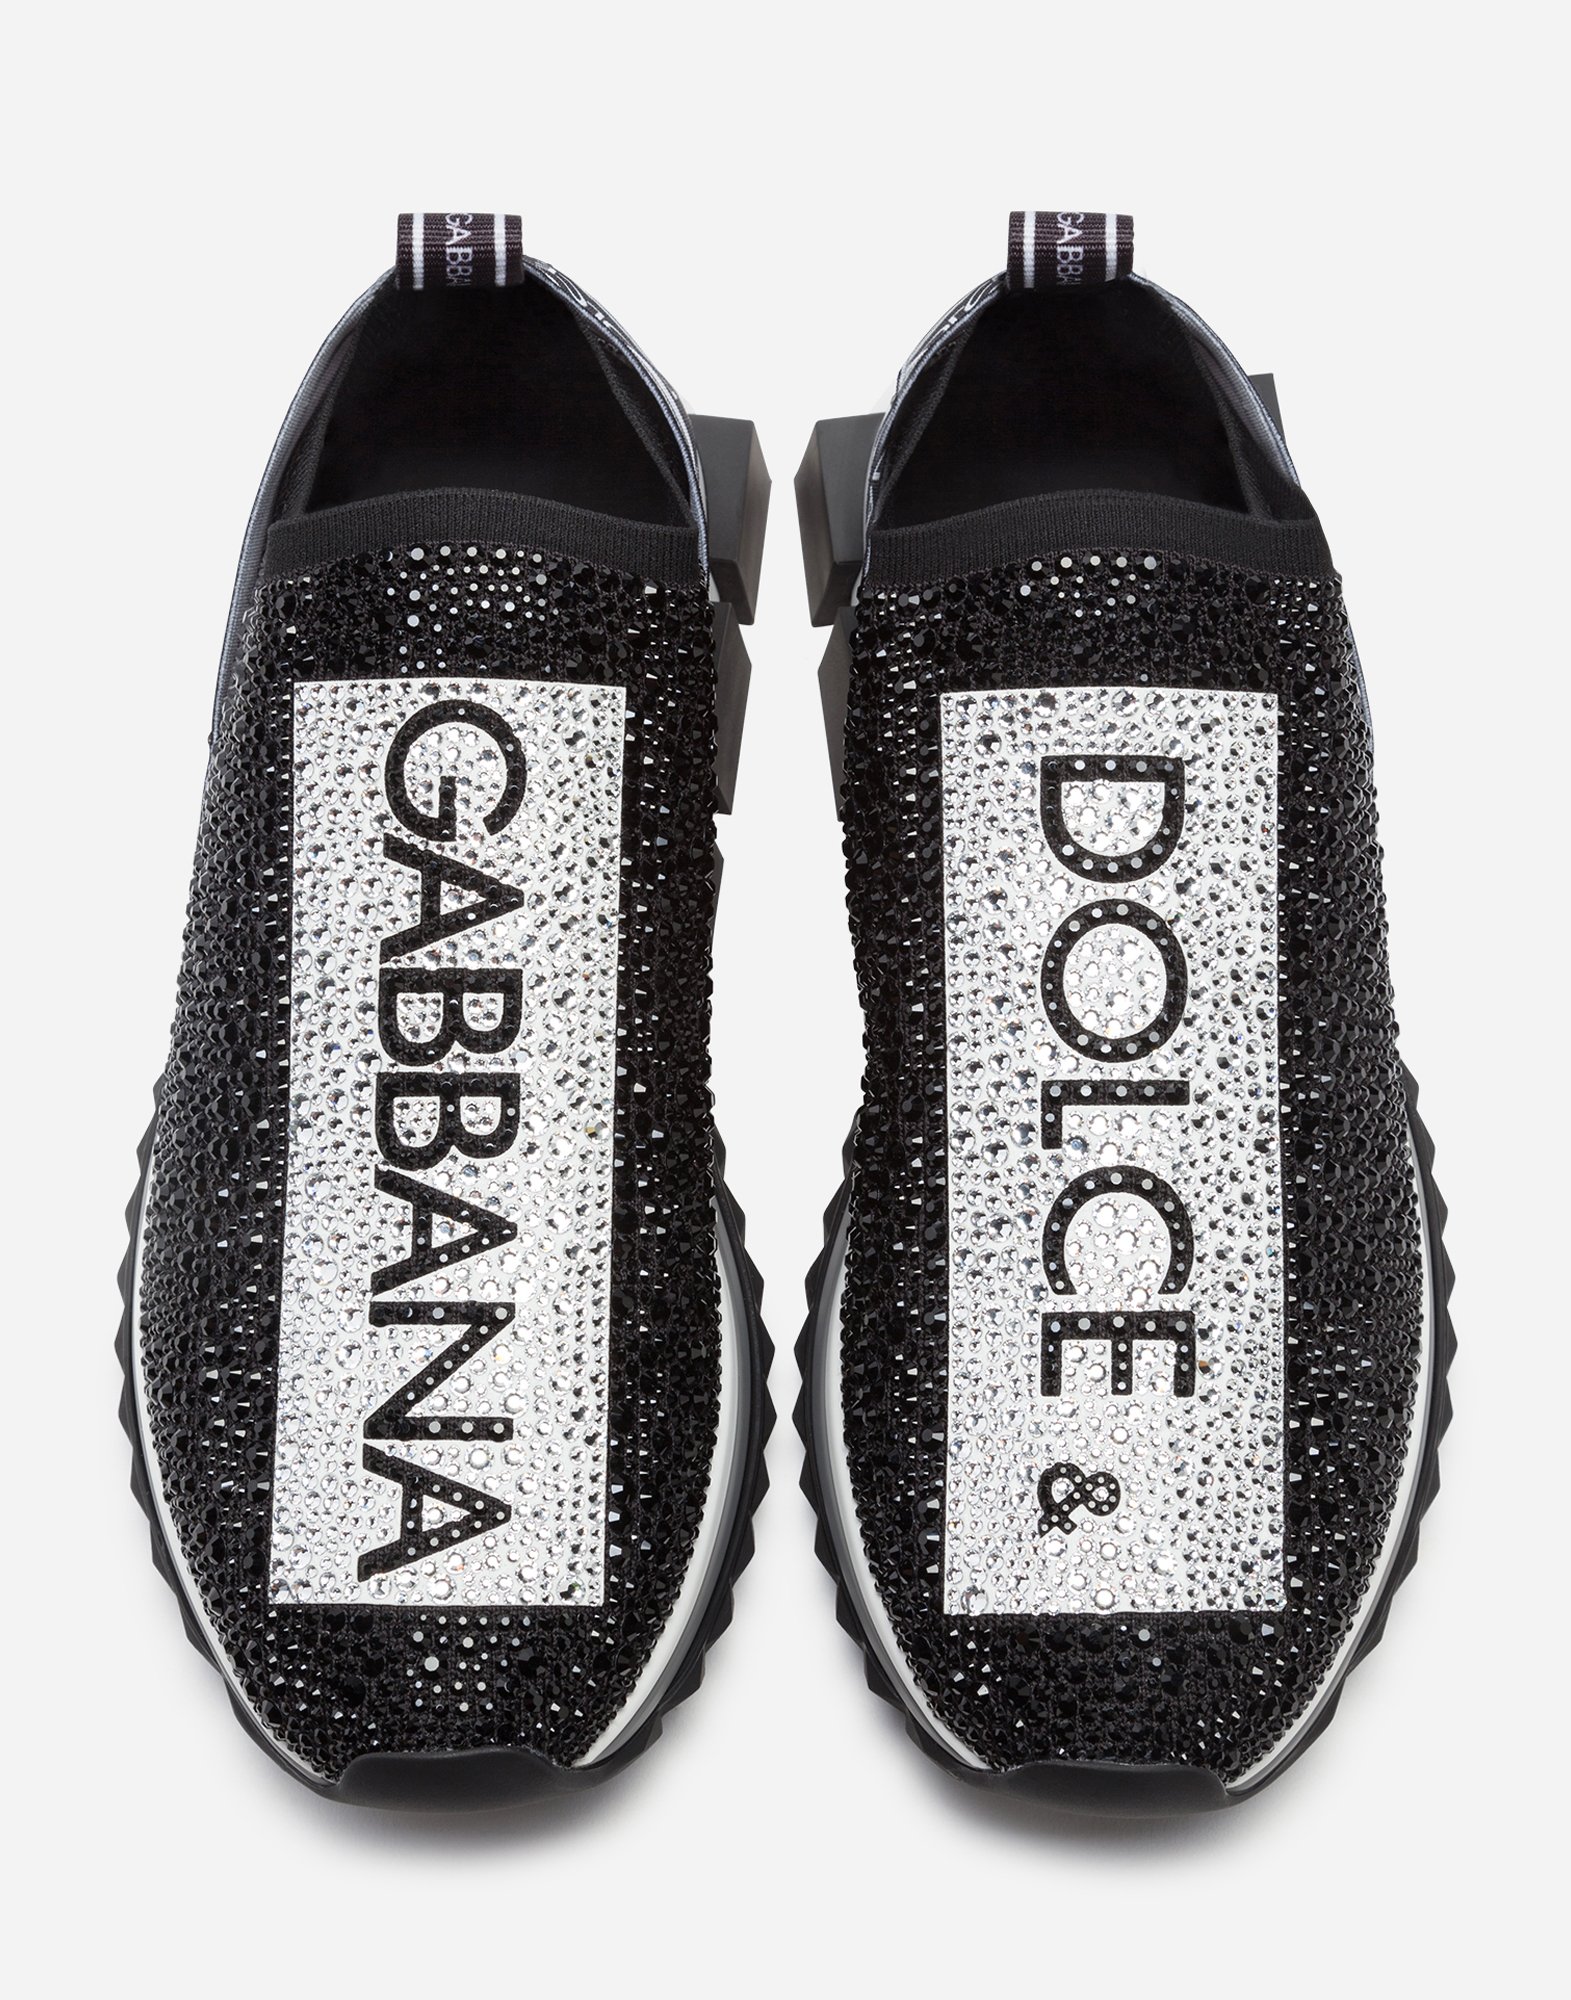 dolce y gabbana shoes